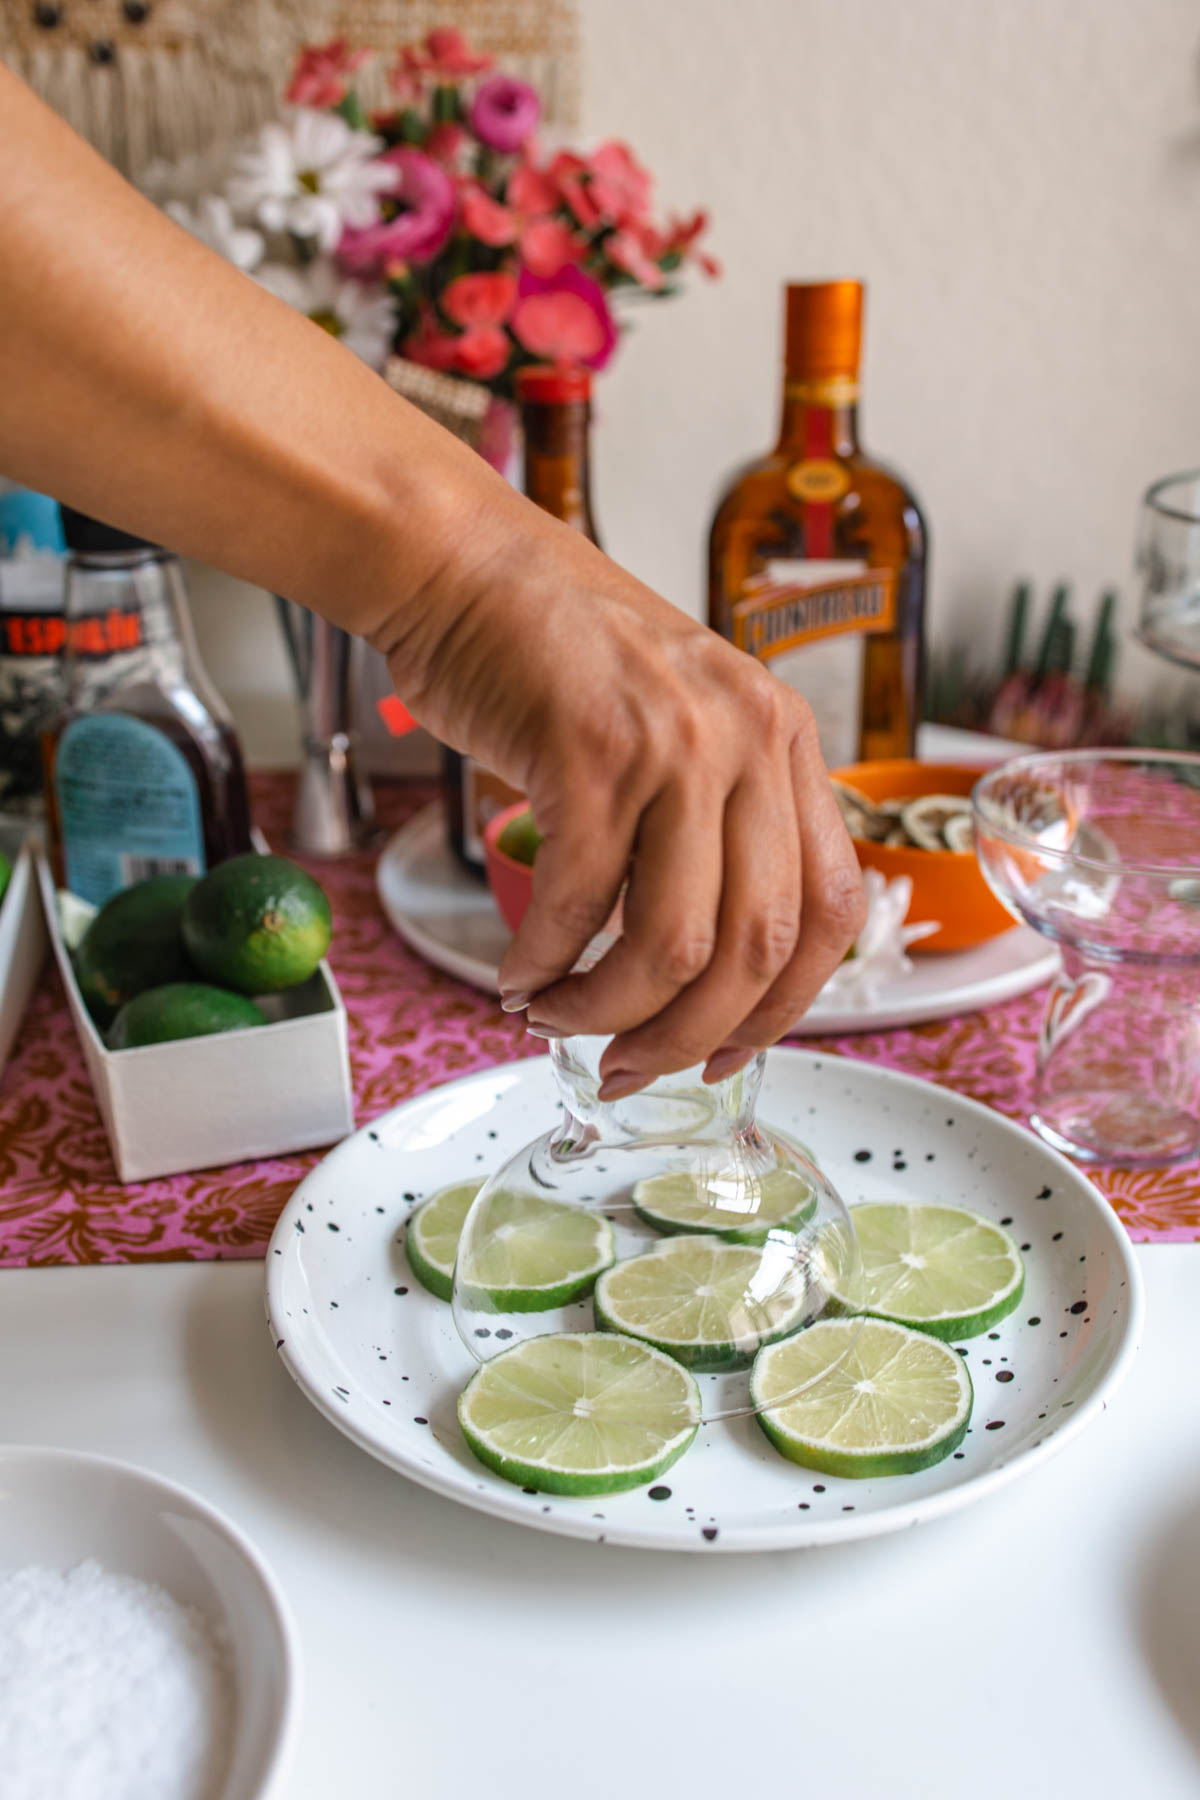 A person dipping their upside down margarita glass into a plate with sliced limes.